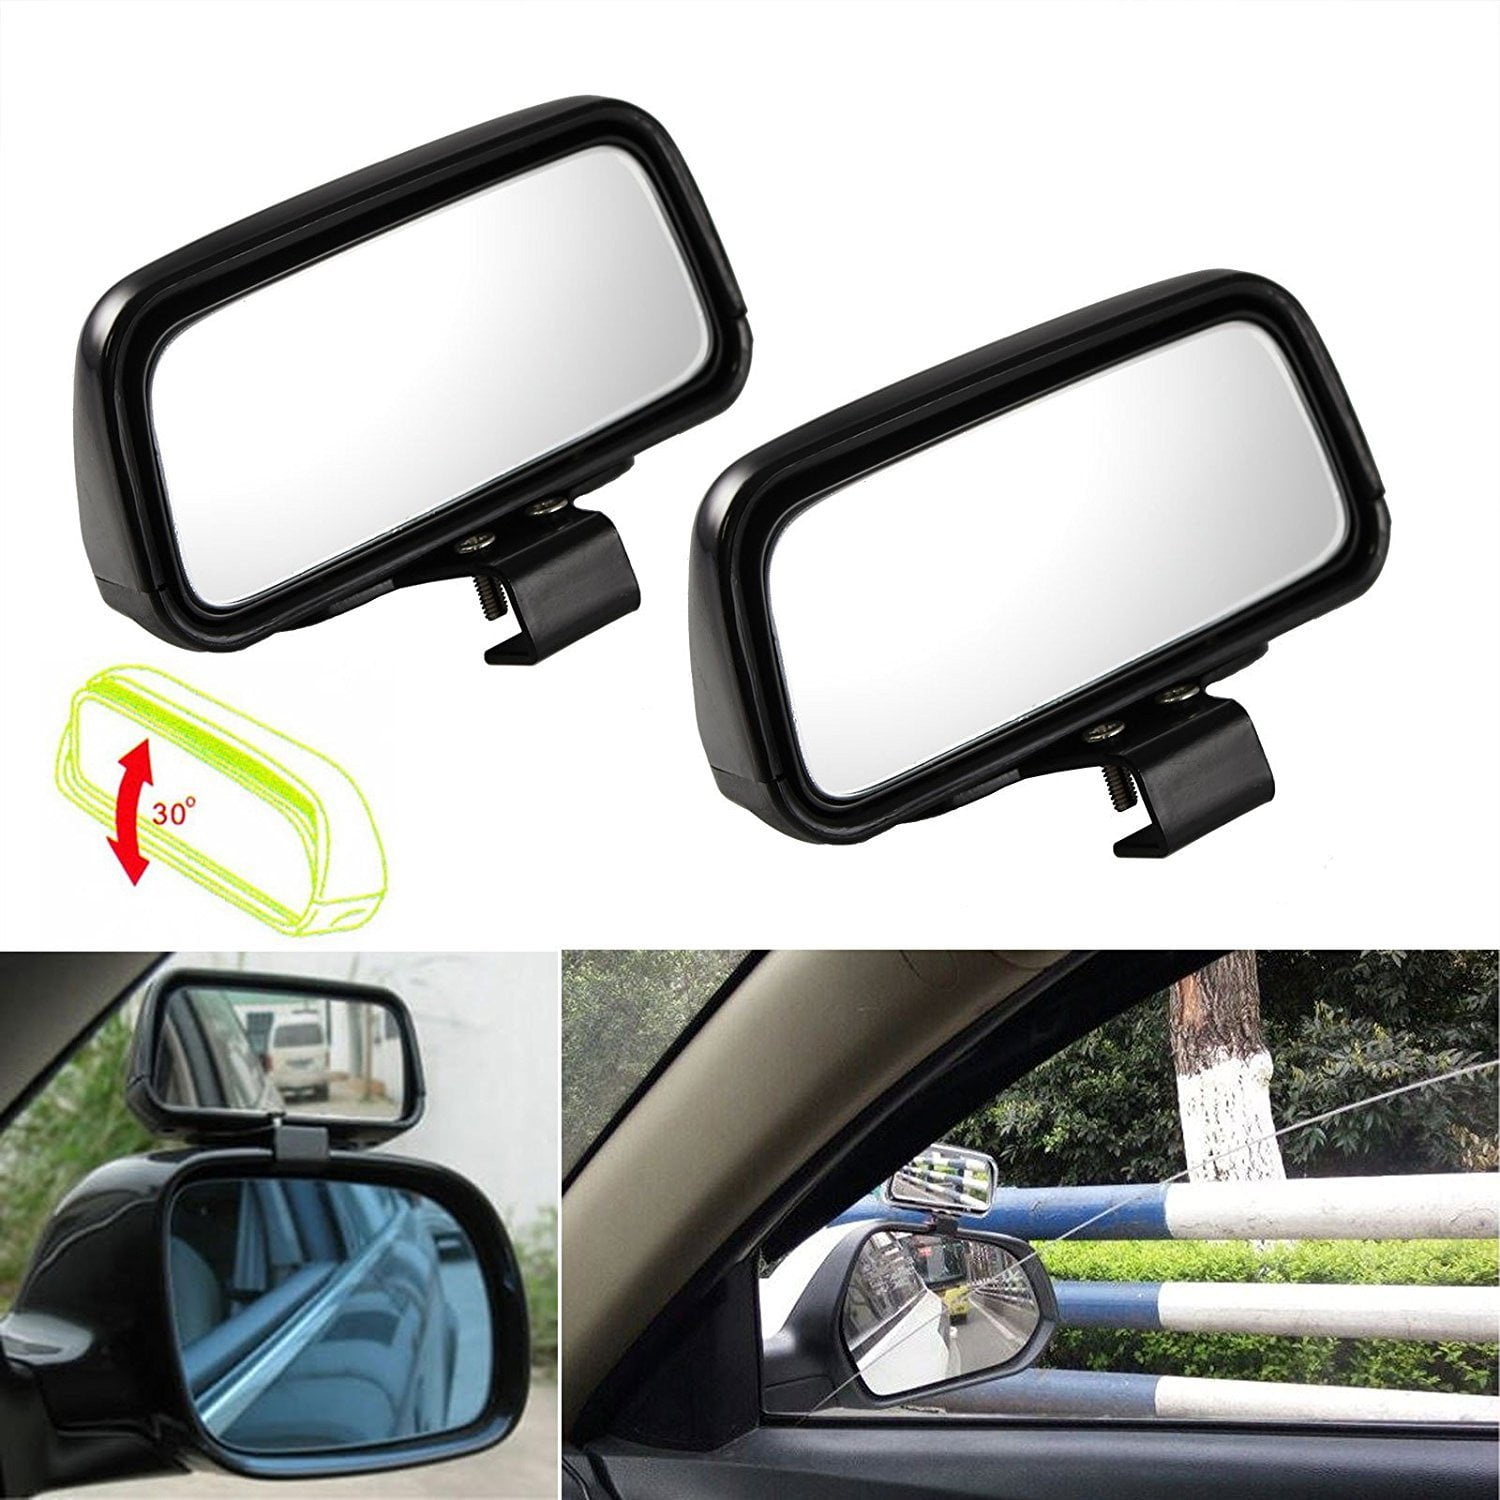 Black HD Glass and ABS Housing Convex Wide Angle Rearview Mirror with Adjustable Stick for Universal Car LivTee 2PCS Round Blind Spot Mirror 